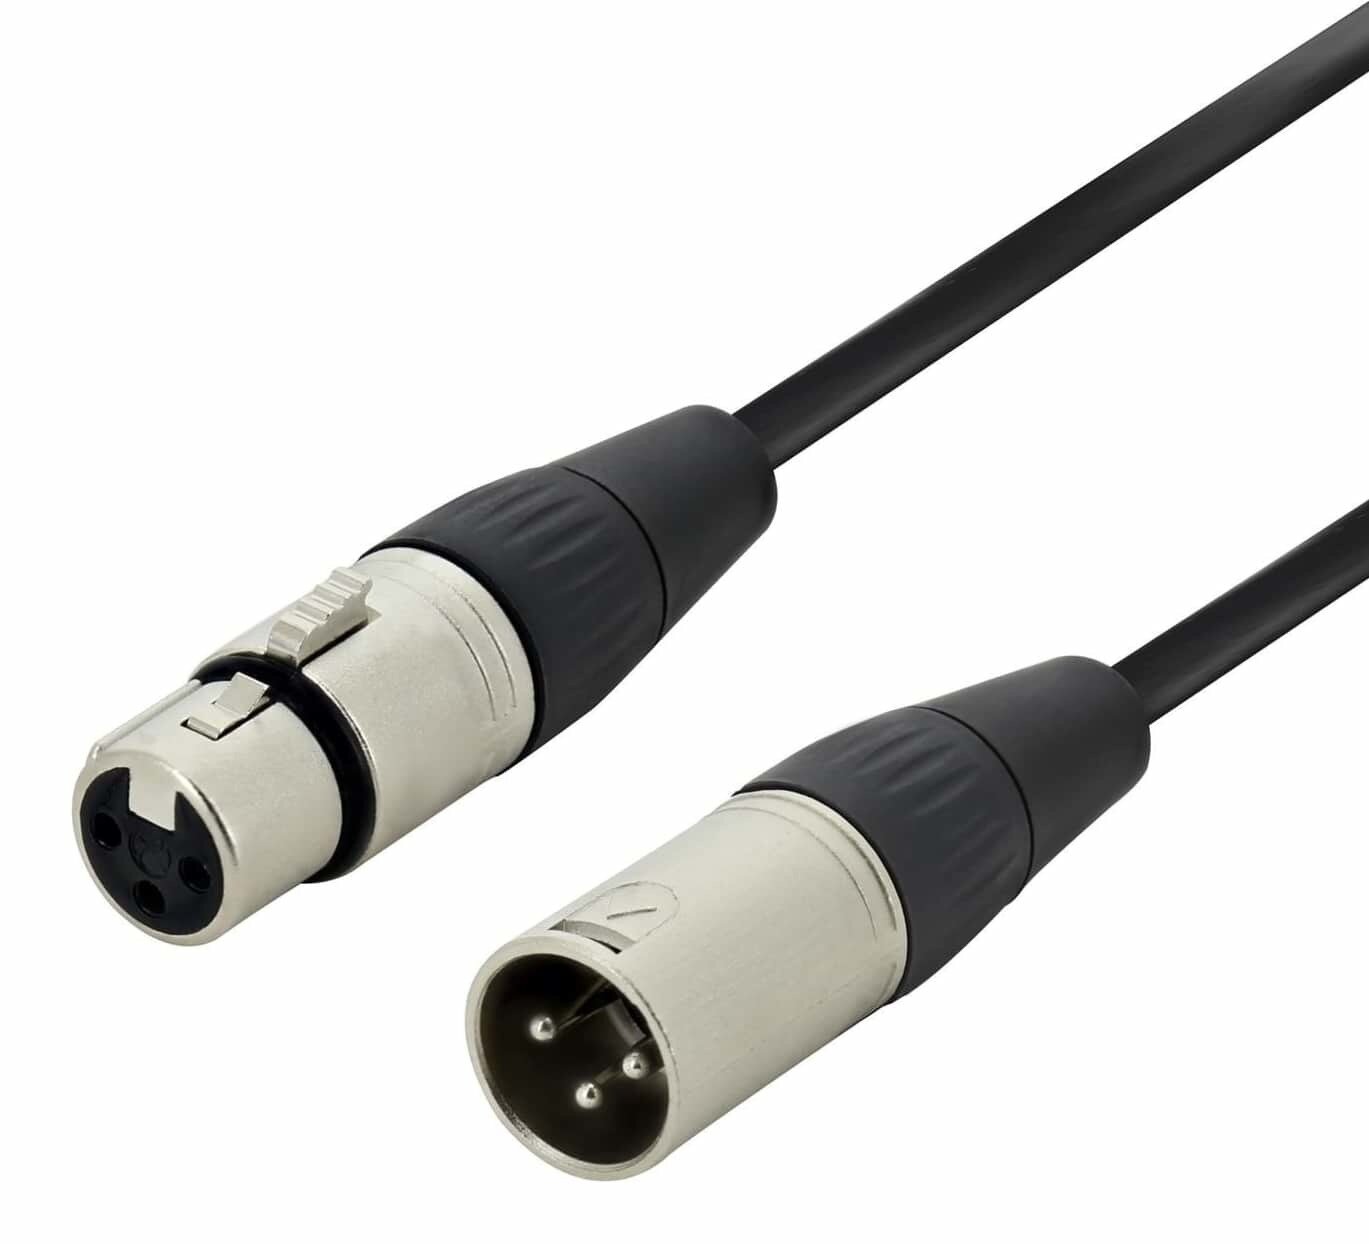 Microphone Cable with 2 Microphone XLR plugs, 5m